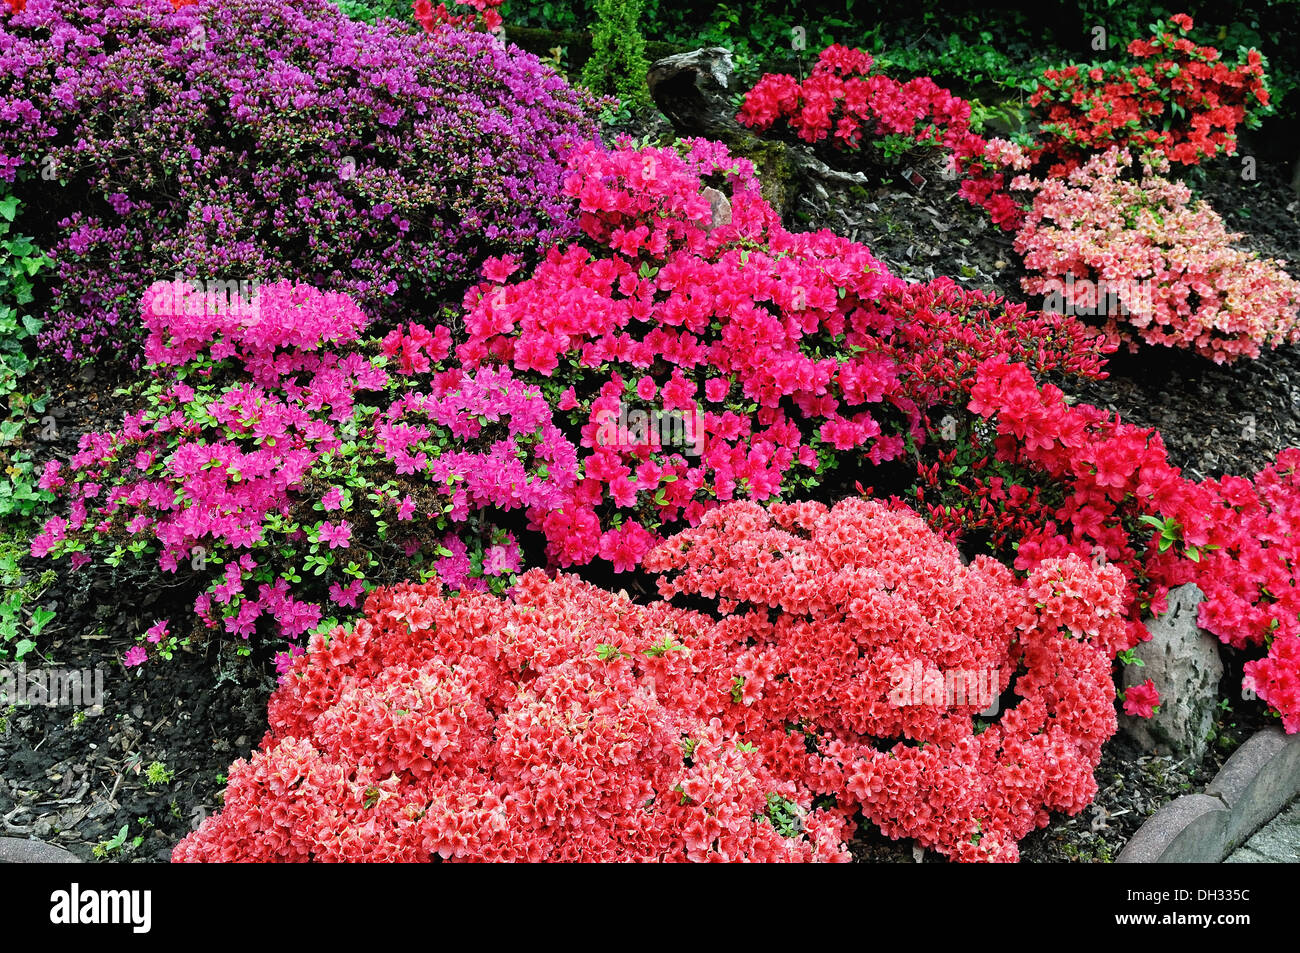 Garden with rhododendron Stock Photo